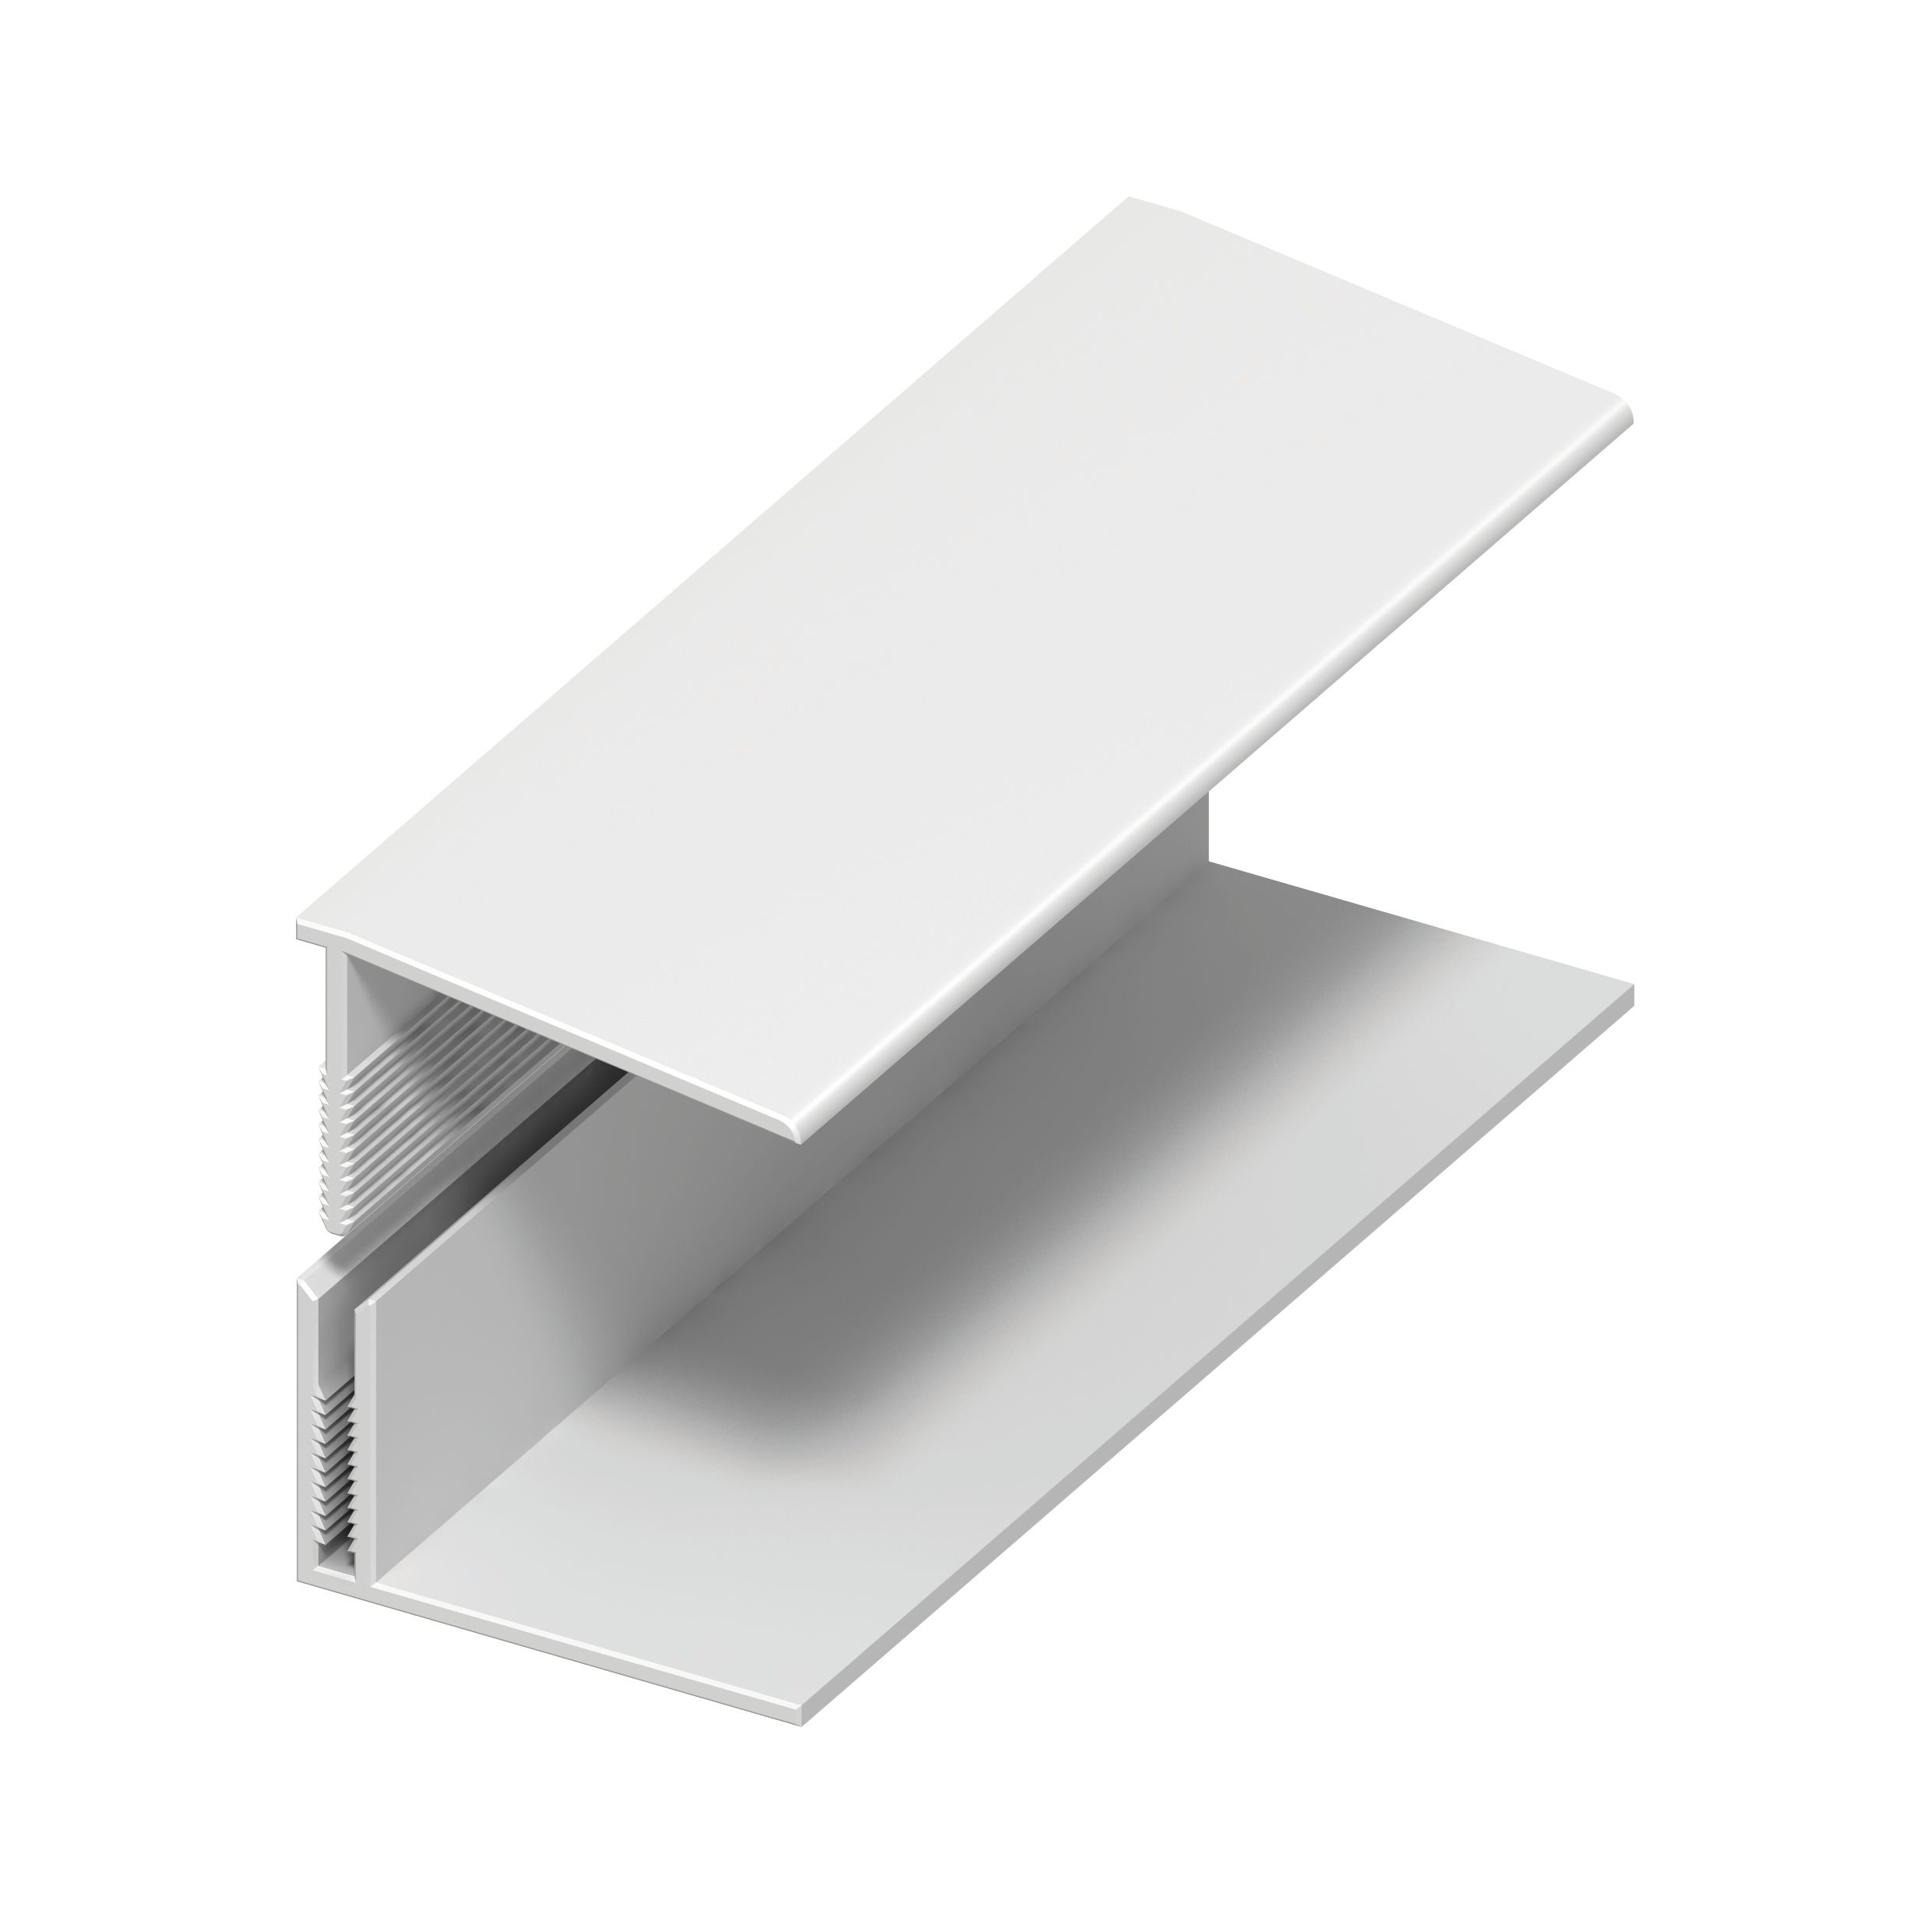 Image of Wickes PVCu White Top/Vertical Edge Cladding Trim 2500mm